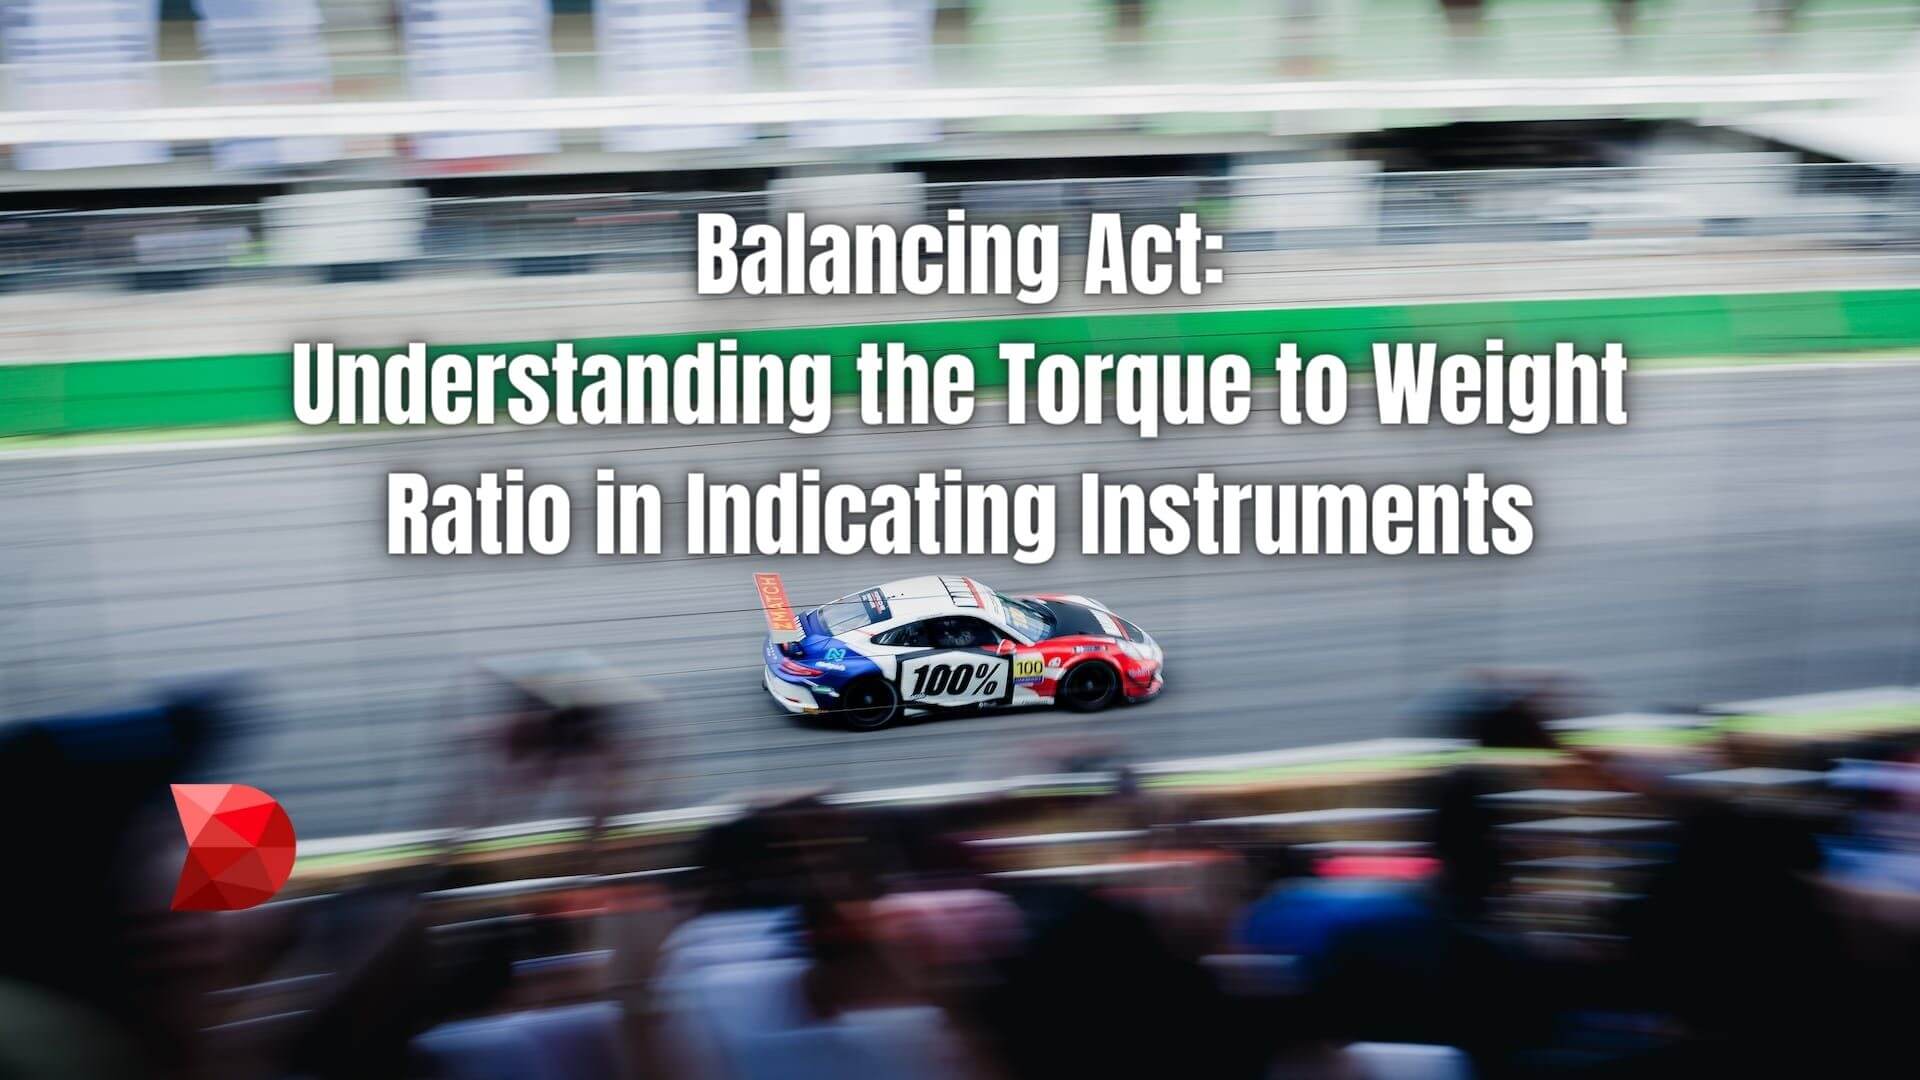 Unlock the secrets of torque-to-weight ratio in indicating instruments. Click here to learn, apply, and enhance precision today!